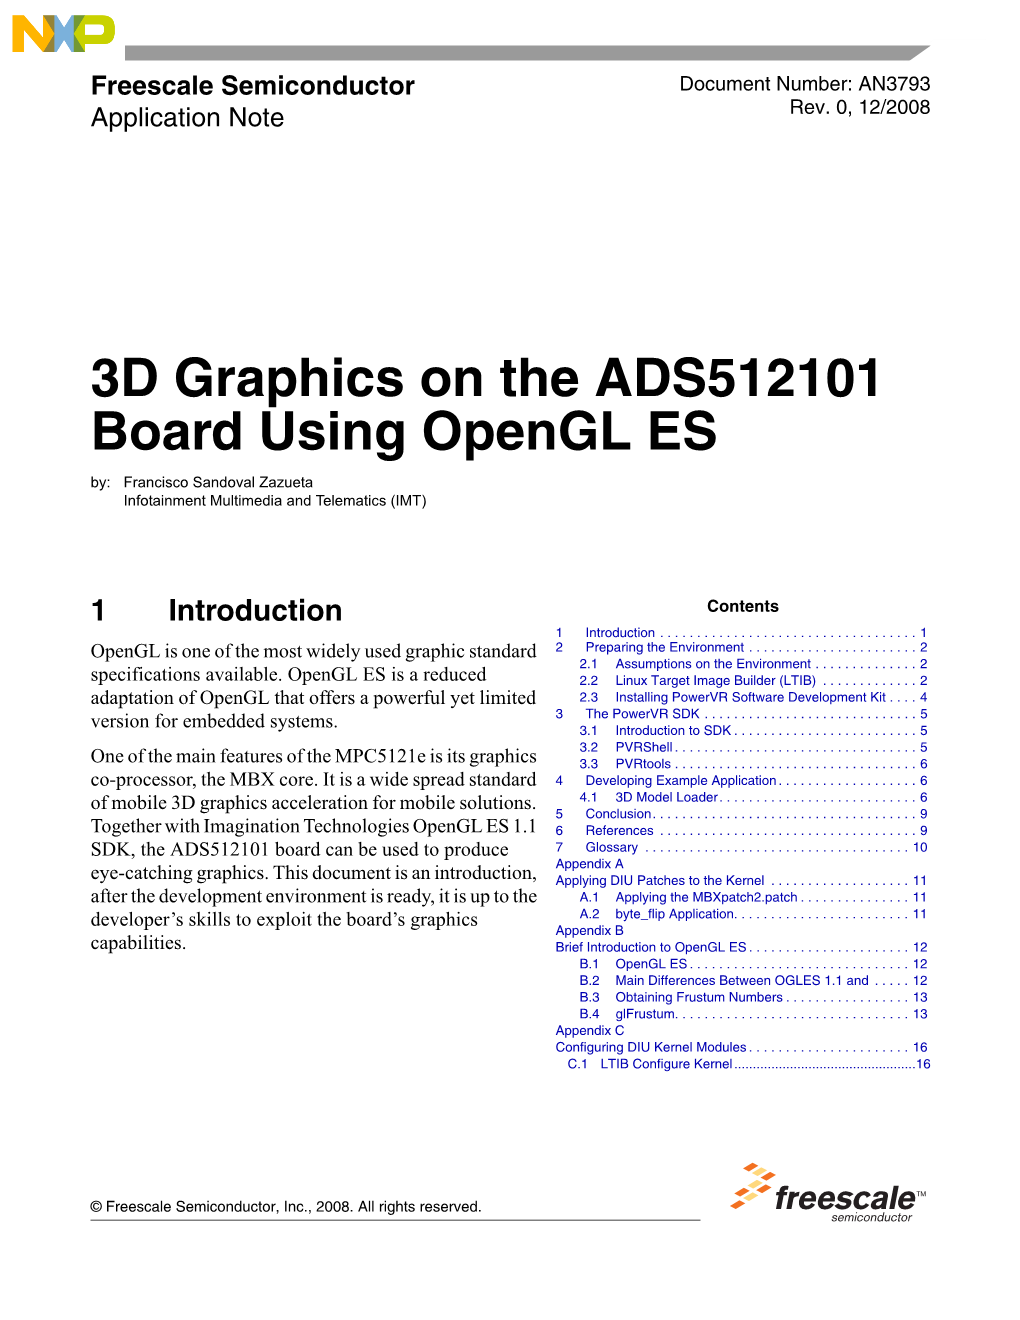 3D Graphics on the ADS512101 Board Using Opengl ES By: Francisco Sandoval Zazueta Infotainment Multimedia and Telematics (IMT)